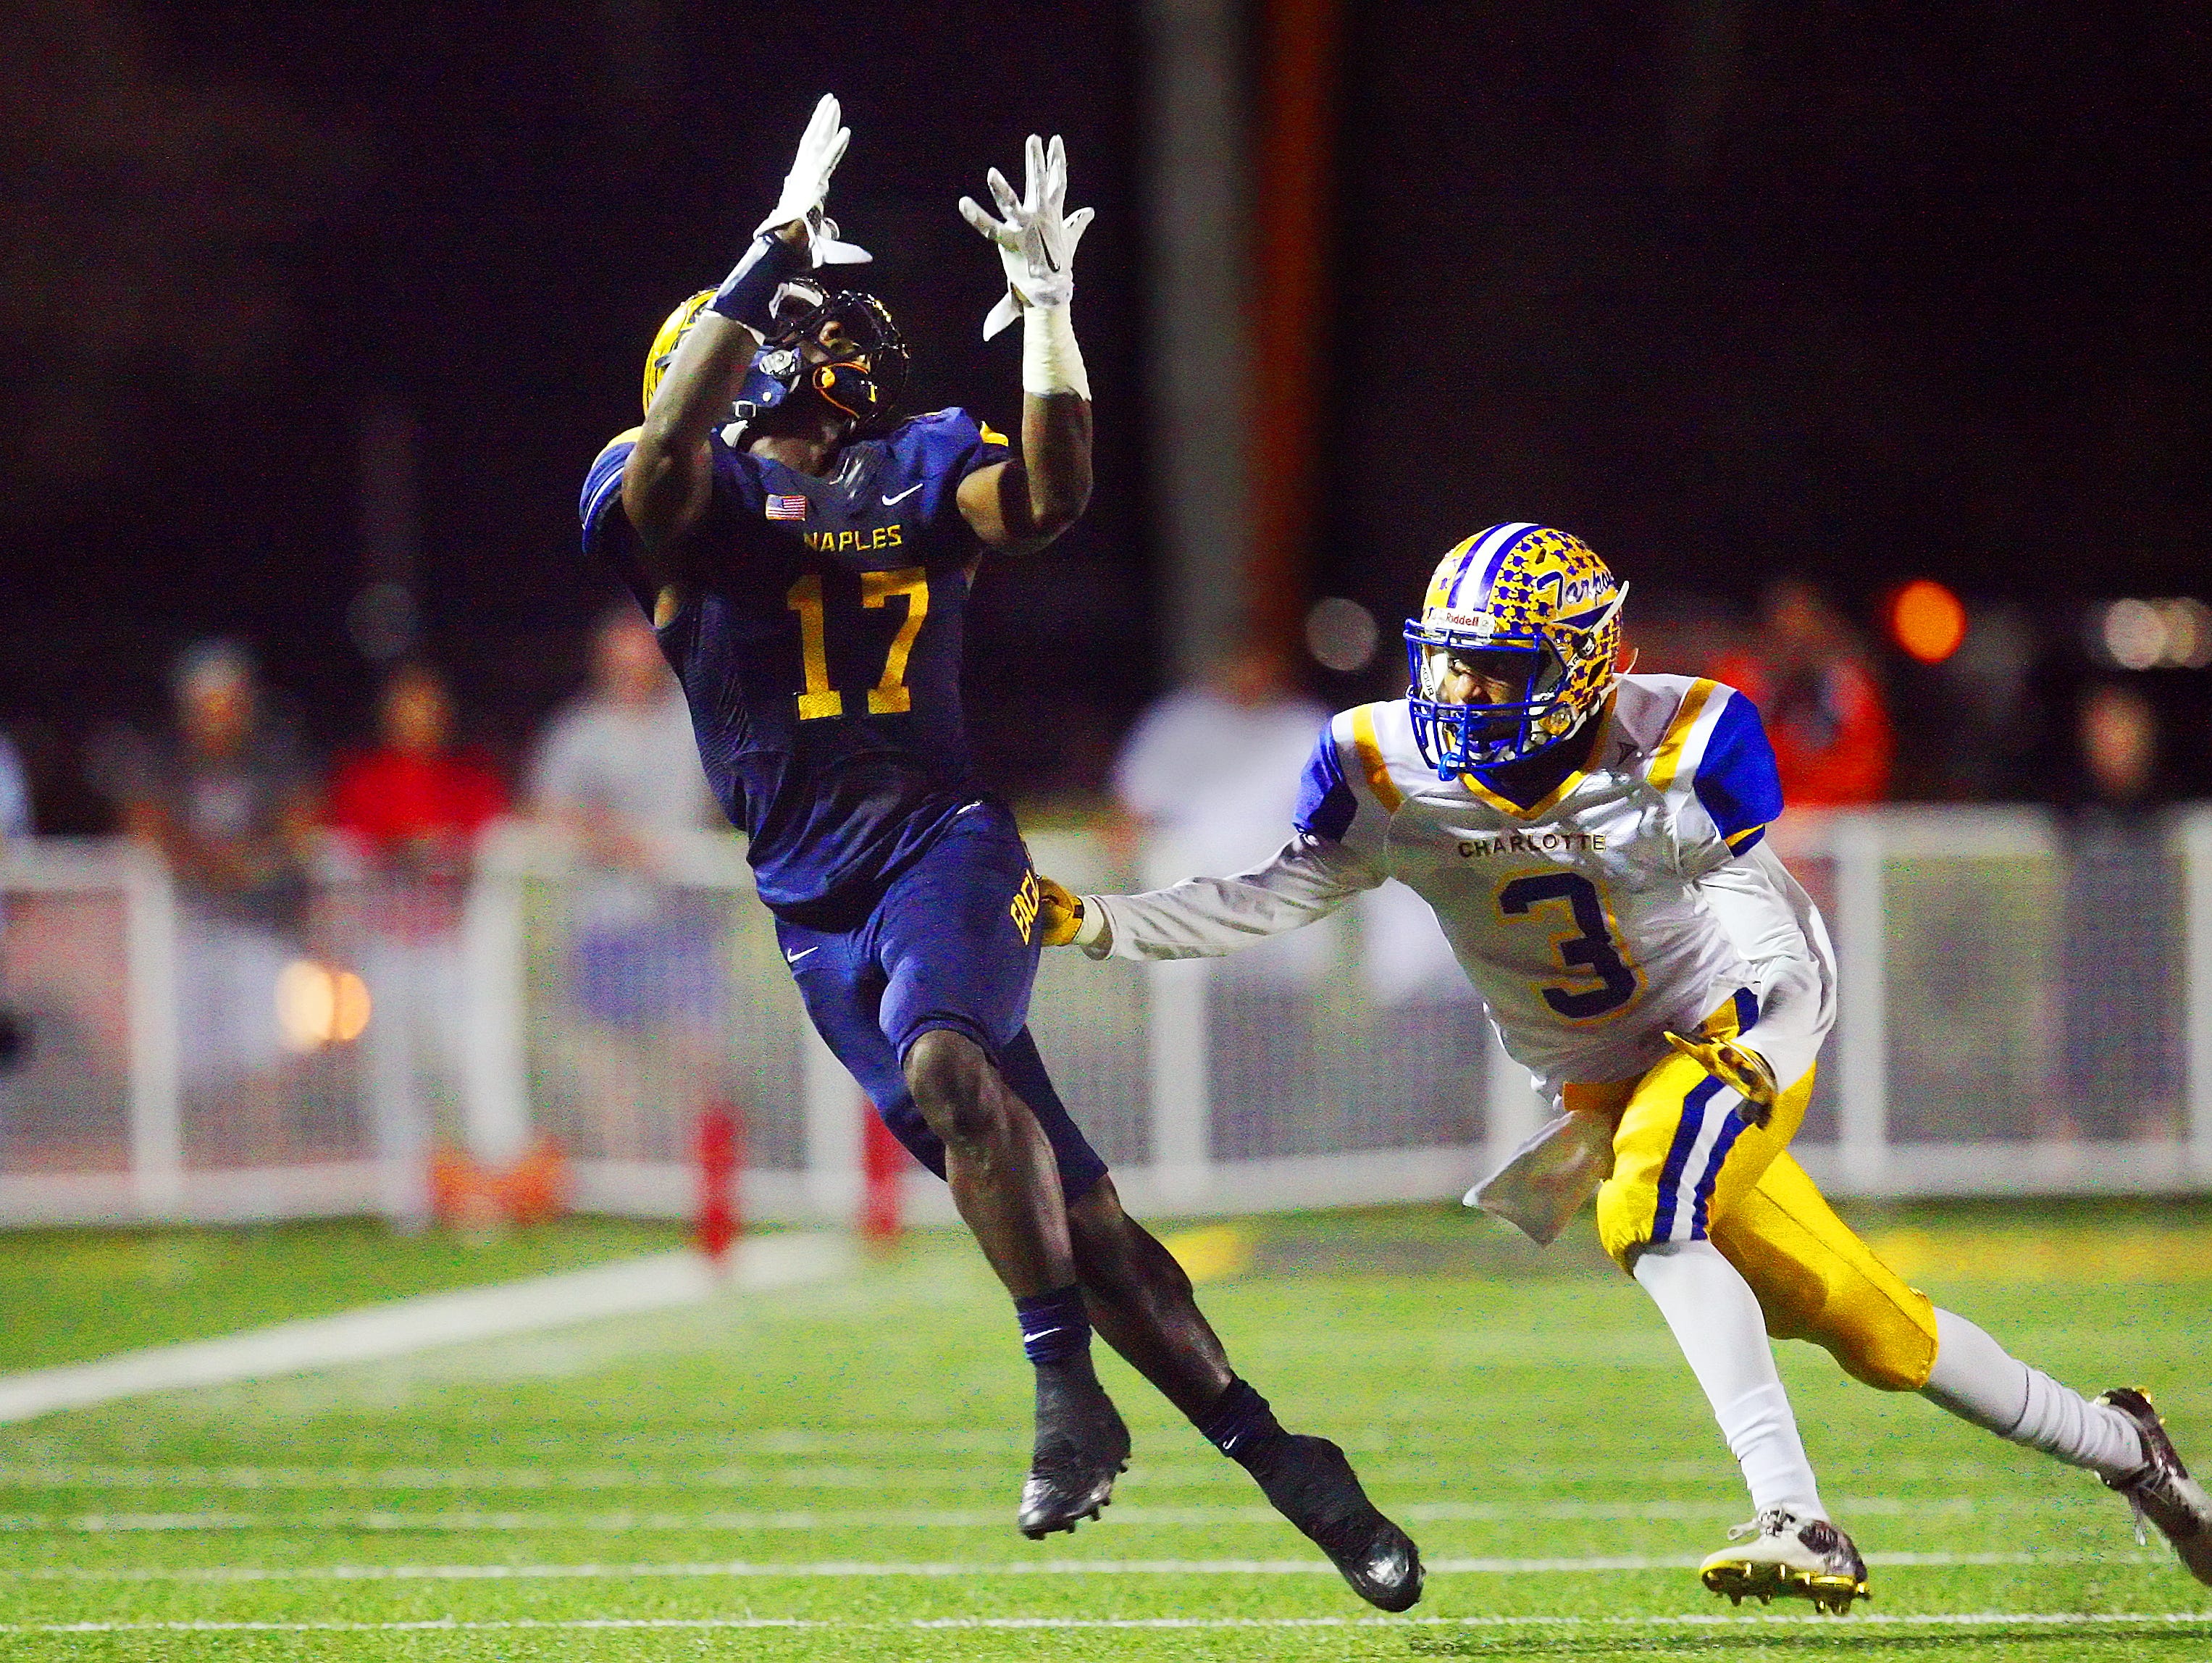 Naples senior cornerback Tyler Byrd, a University of Miami commit, will take an official visit to the University of Tennessee the weekend before National Signing Day